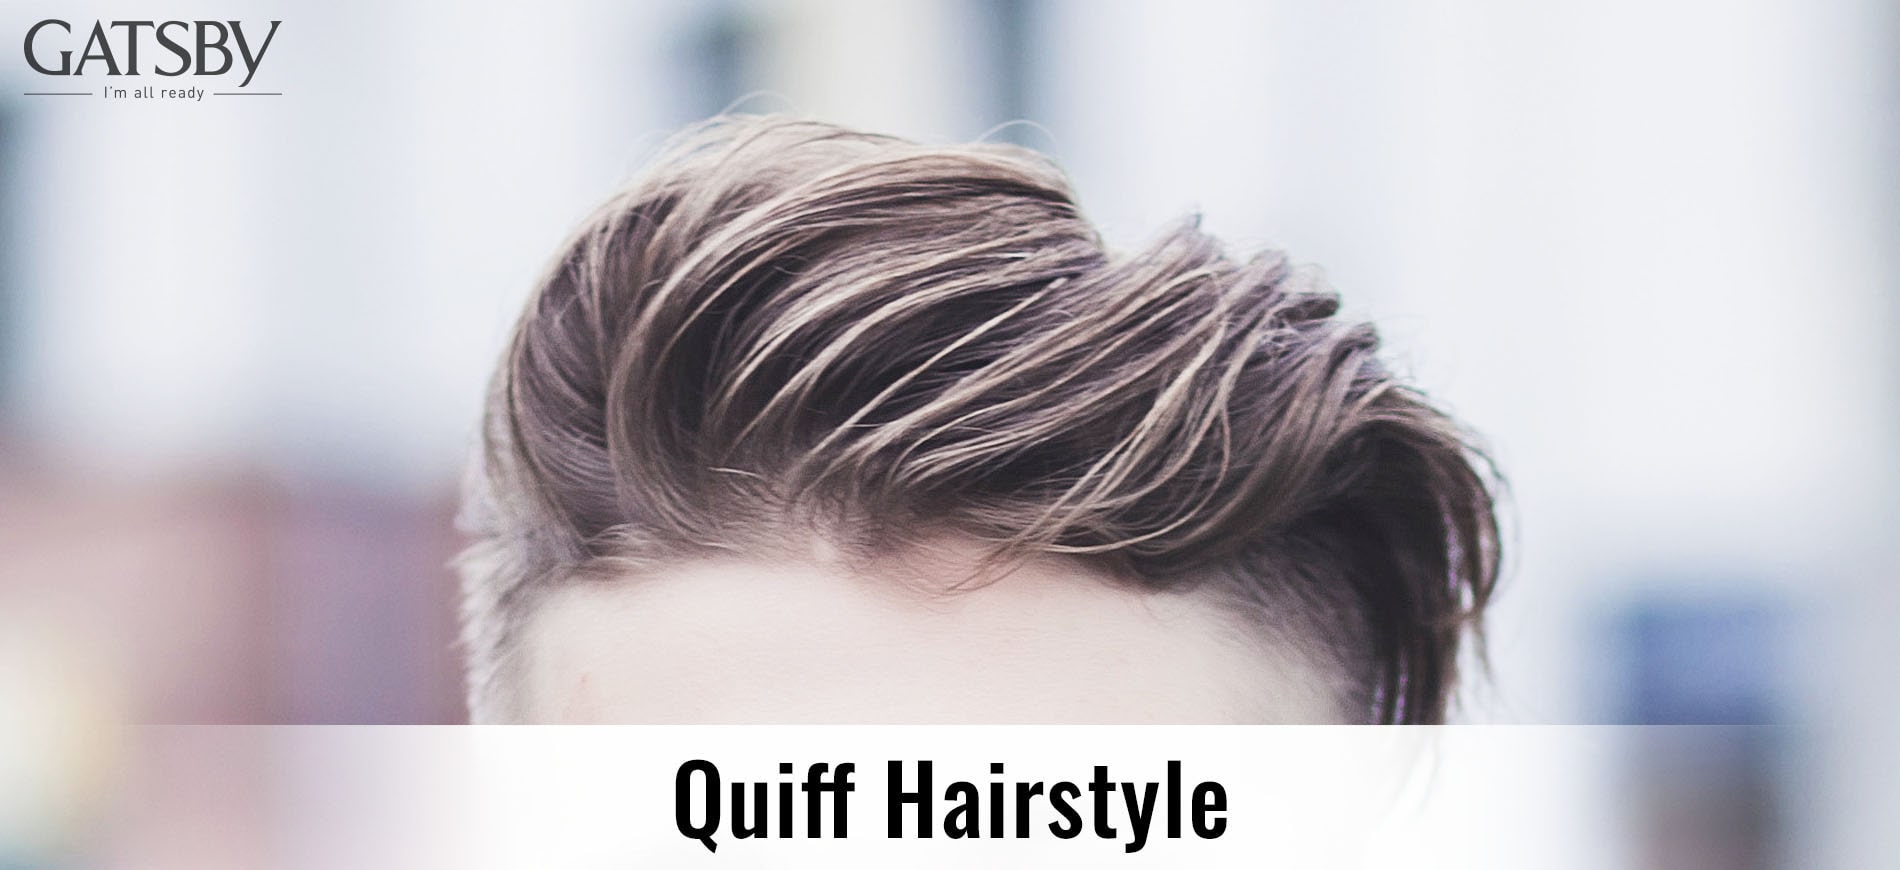 The Essential Guide to Quiff Hairstyle for Men By GATSBY